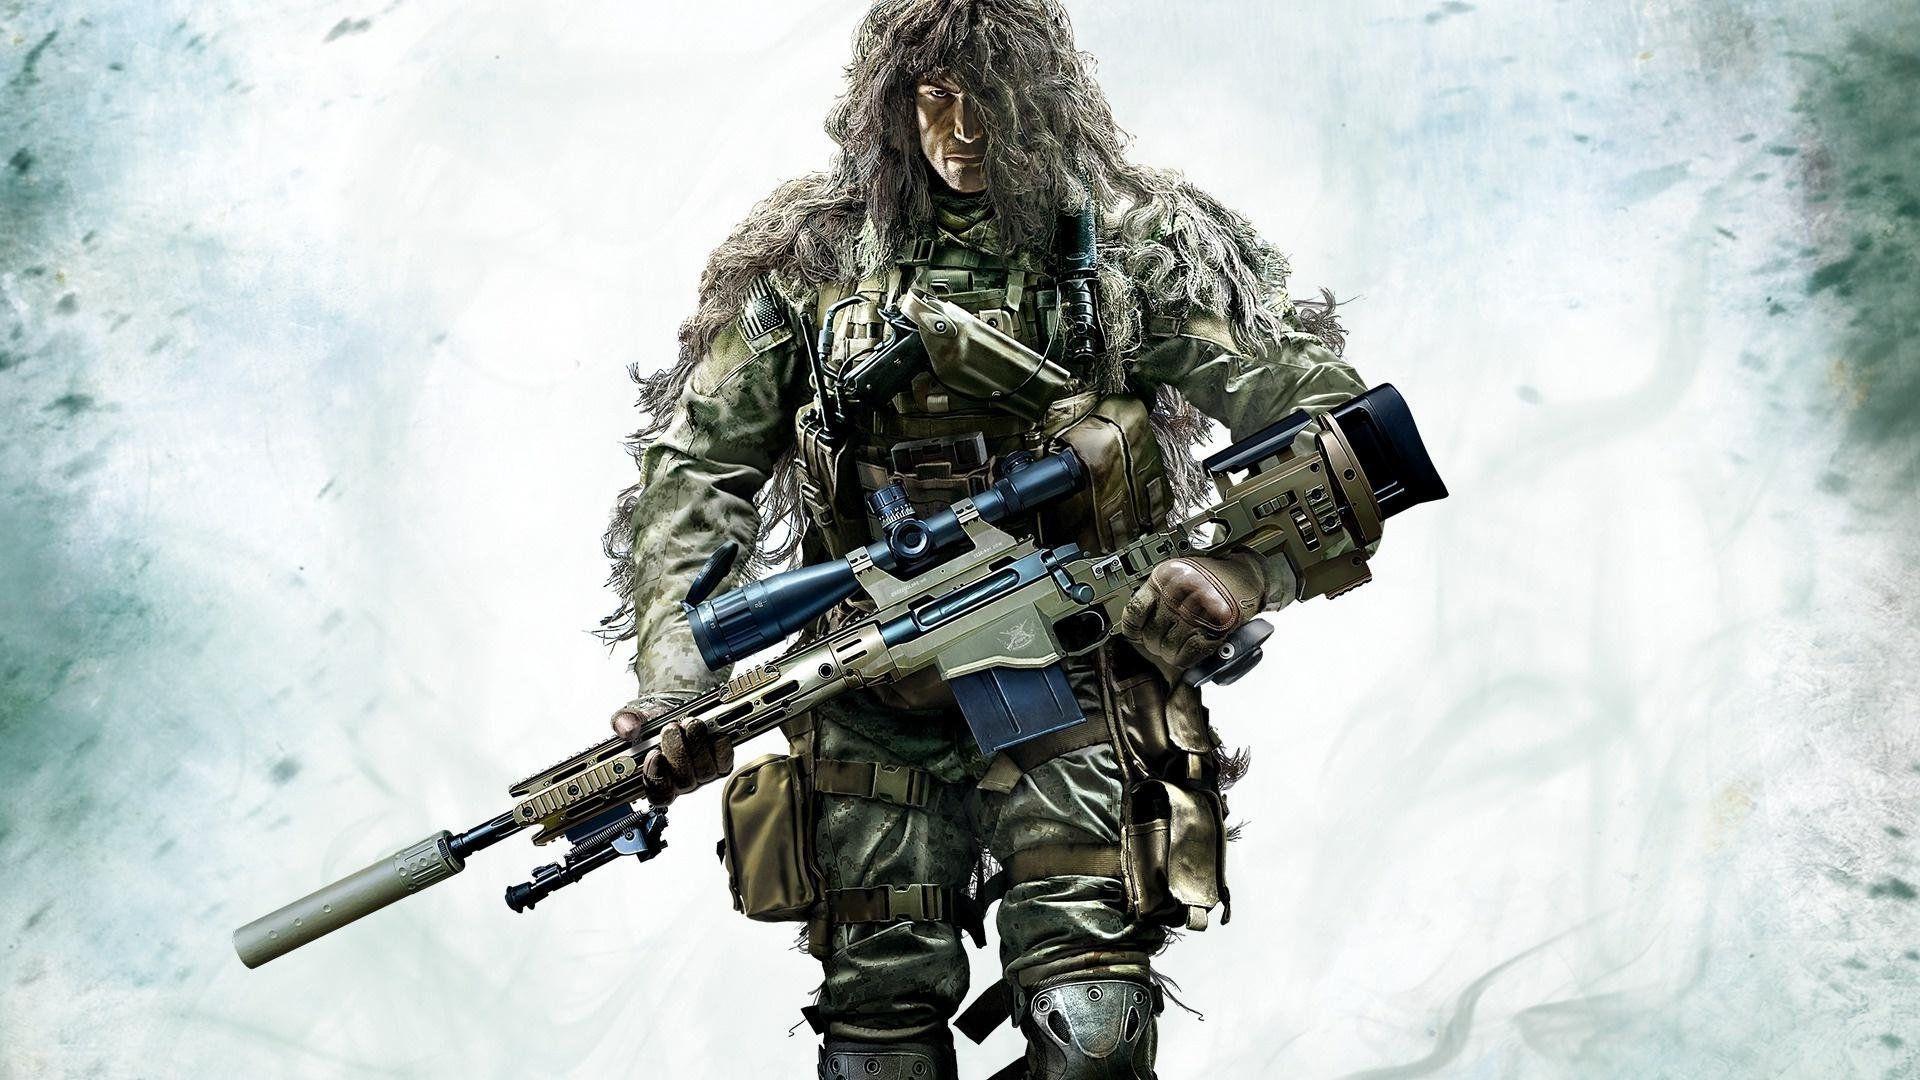 Sniper: Ghost Warrior 3 Wallpaper Image Photo Picture Background